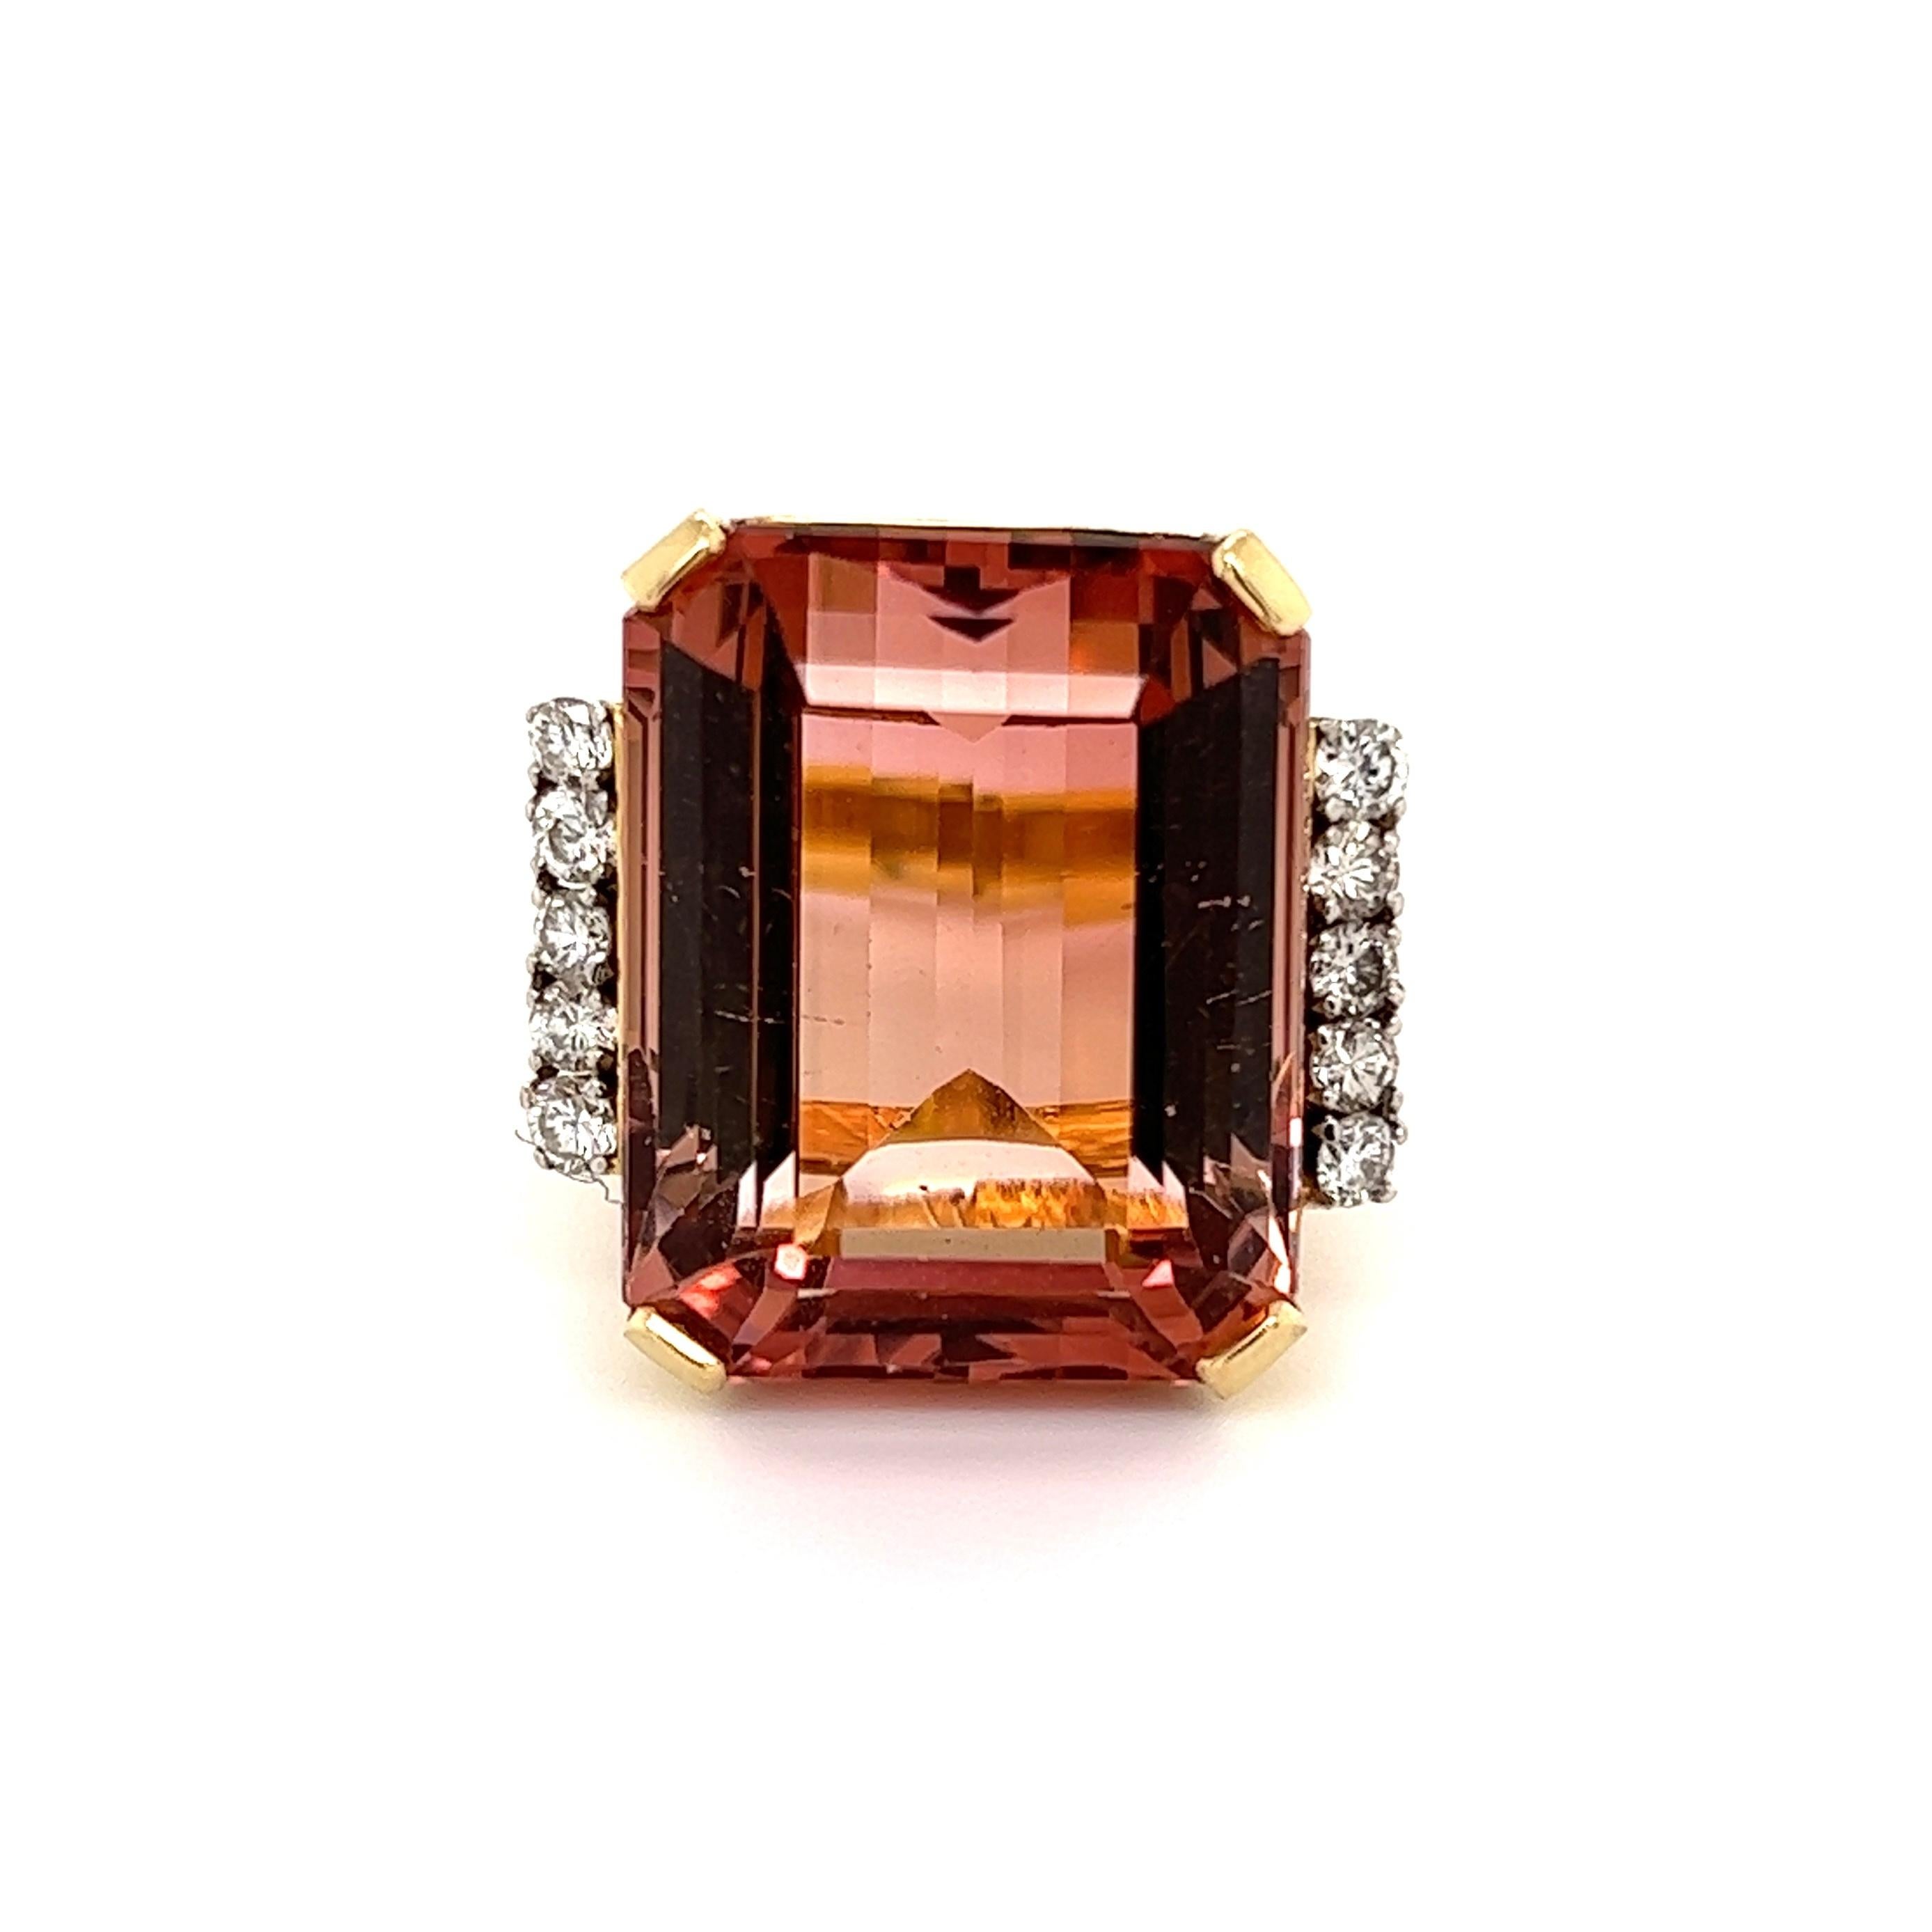 Mixed Cut 27.90 Carat Peach Tourmaline and Diamond Gold Cocktail Ring Estate Fine Jewelry For Sale